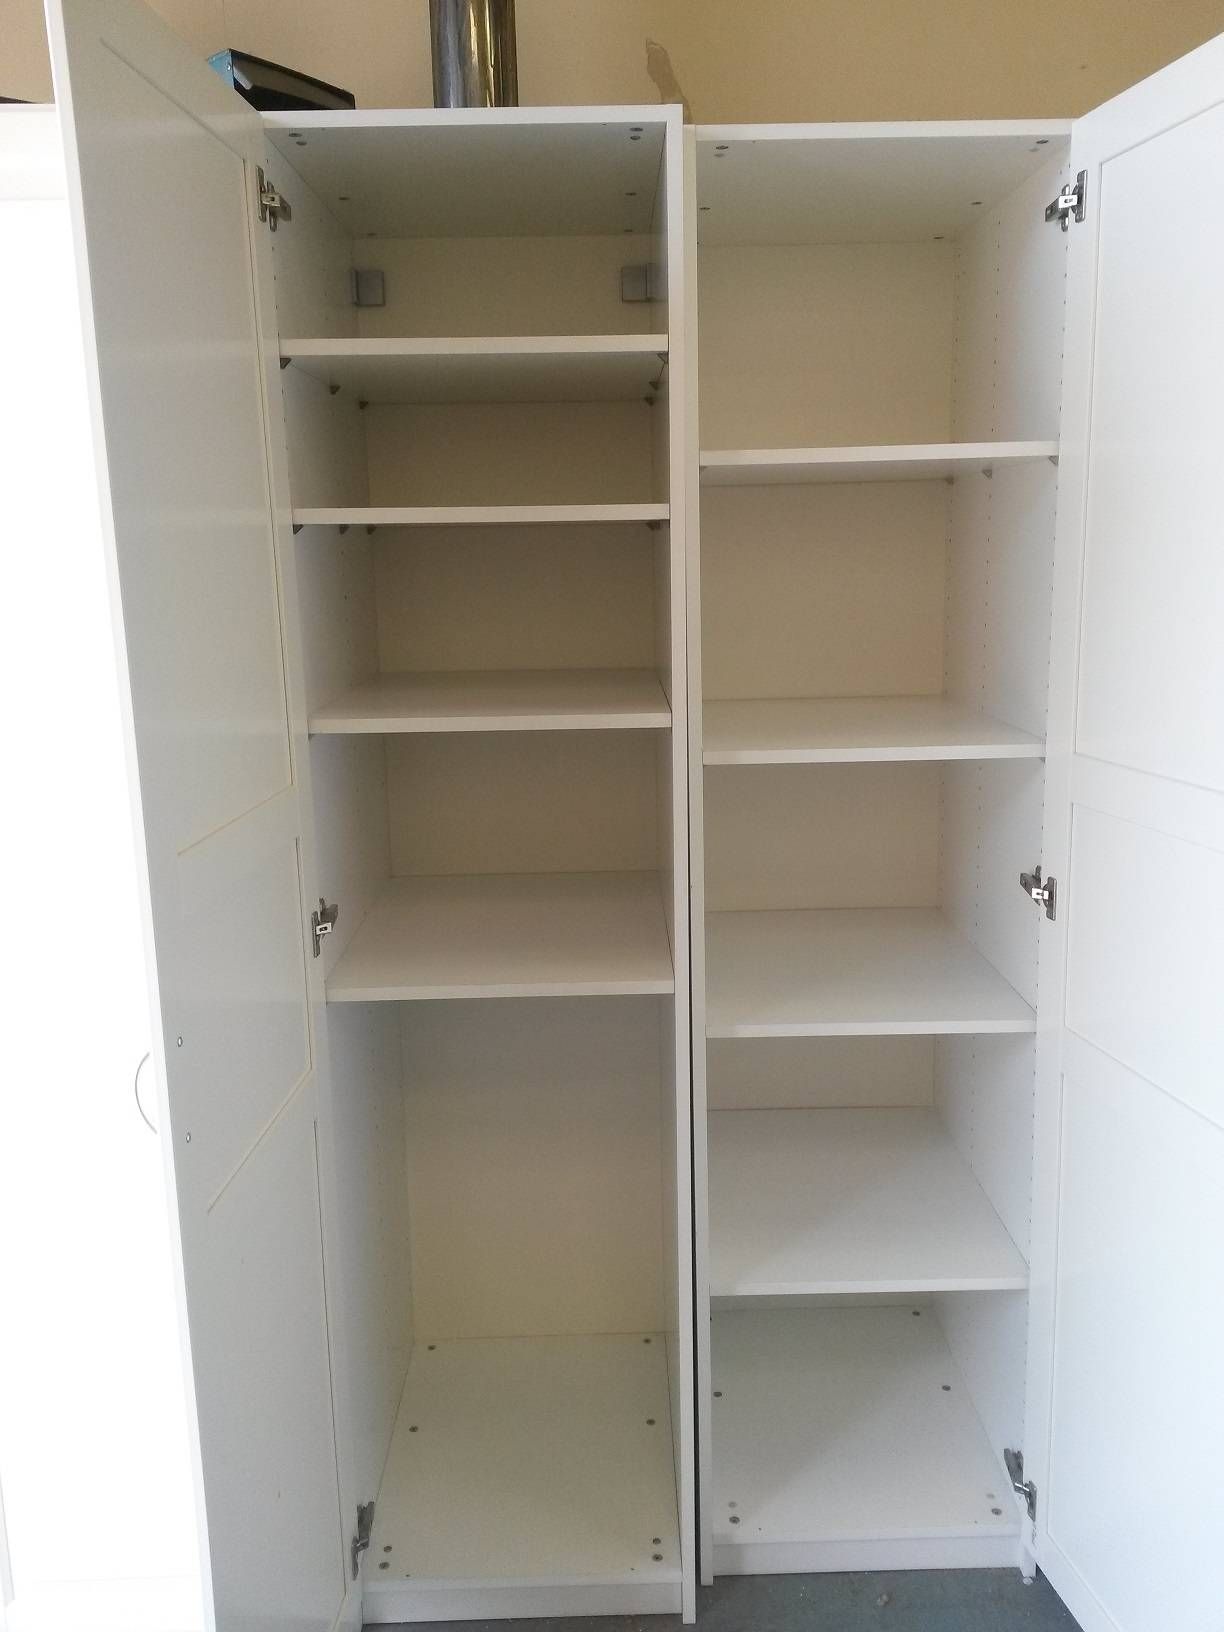 Sold) Wardrobe Set With Single Mirrored Unit And Shoe Rack In Within Cheap White Wardrobes Sets (View 14 of 15)